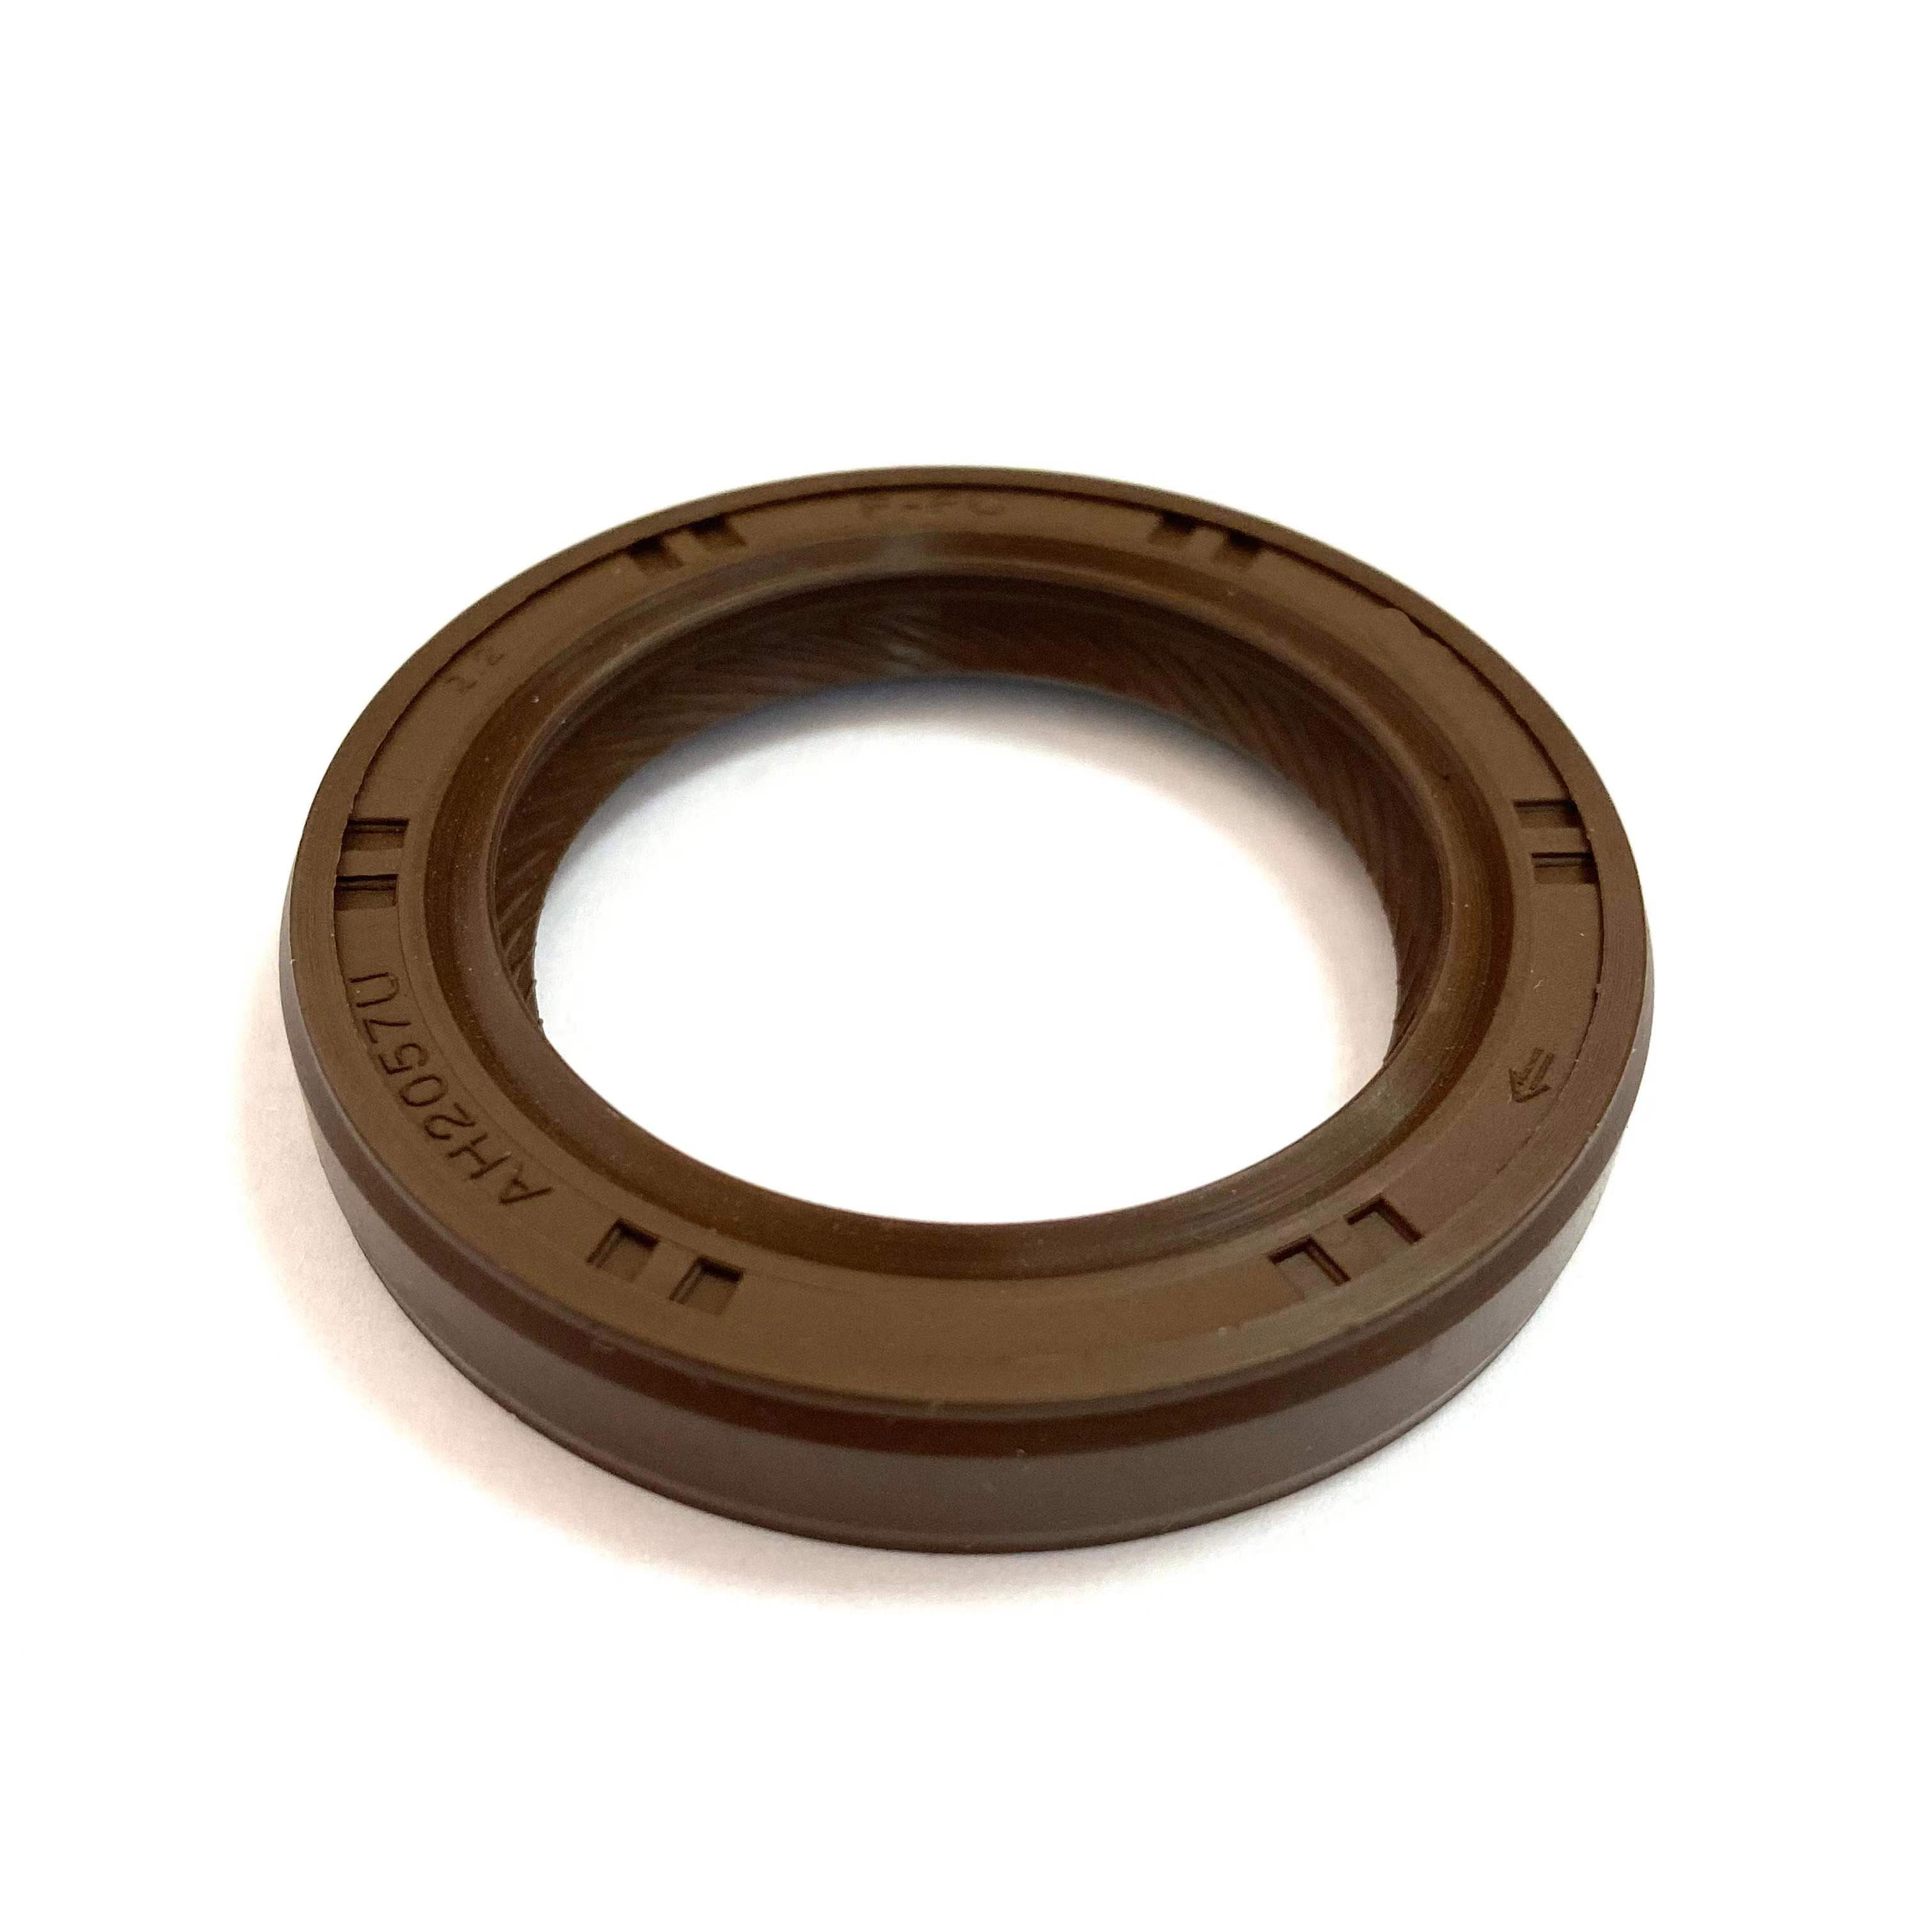 XTSEAO High quality automotive seals Crankshaft oil seal Size35*50*8 OE MD372536 Brown oil seal Rubber FPM NBR FOR Mit sub ishi